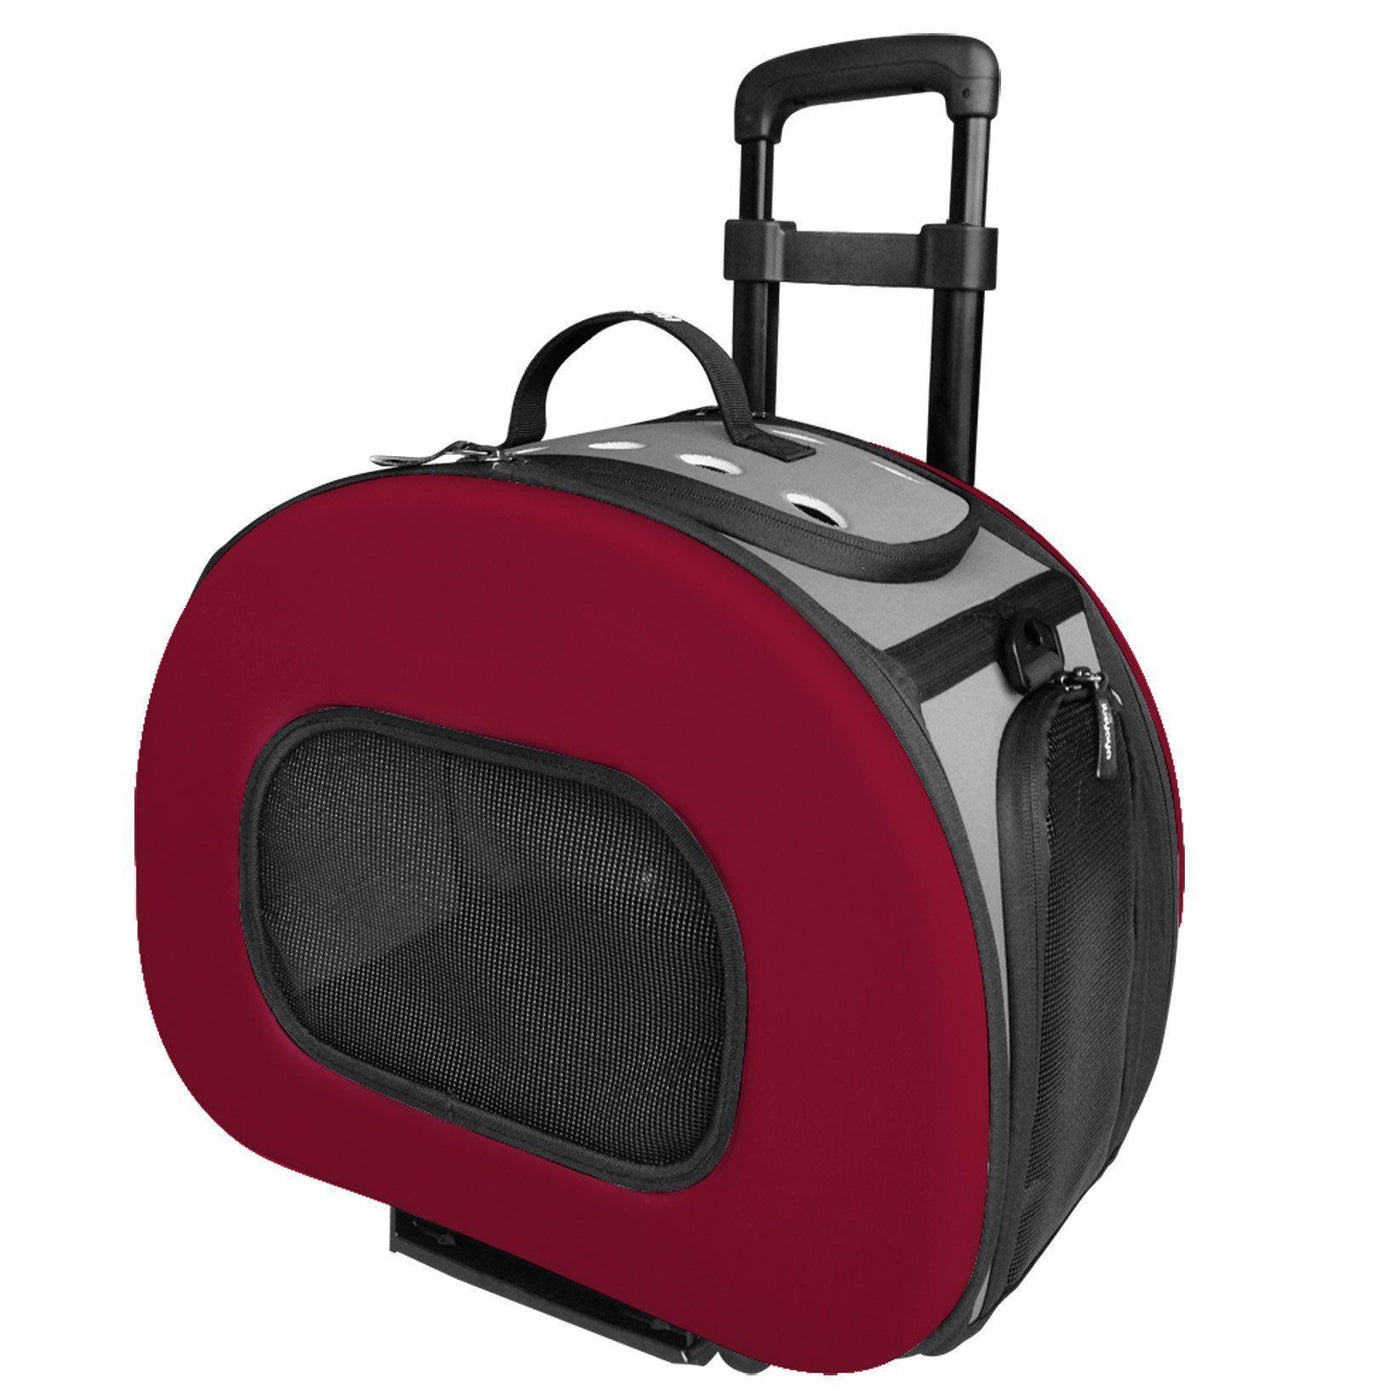 Pet Life Airline Approved Folding Zippered Sporty Mesh Pet Carrier